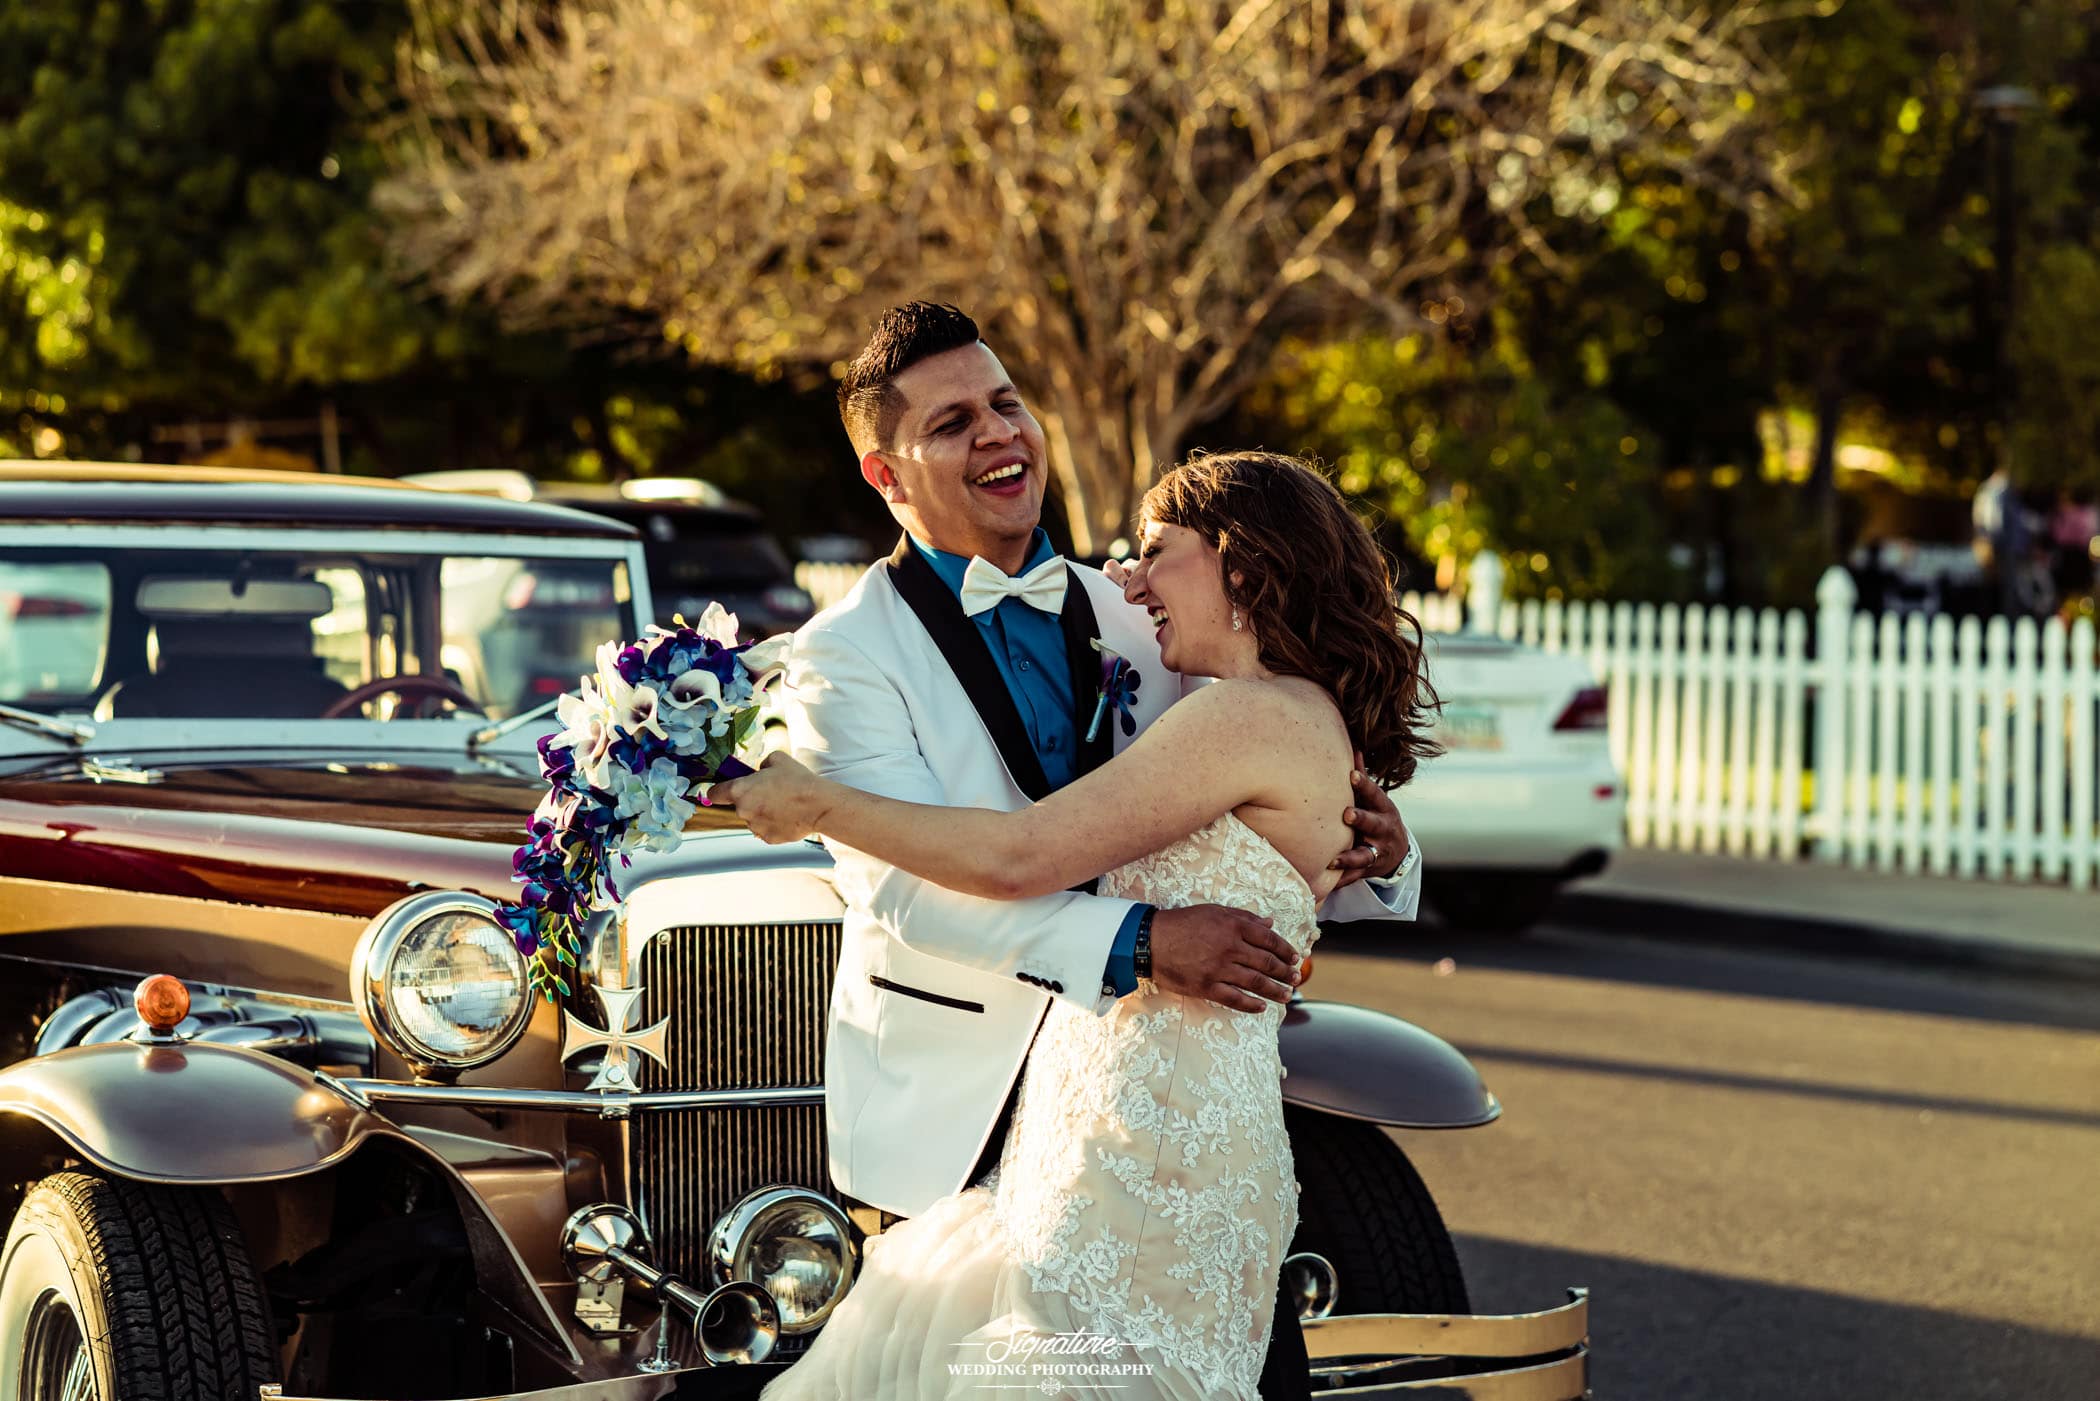 Bride and groom smiling and hugging in front of vintage car